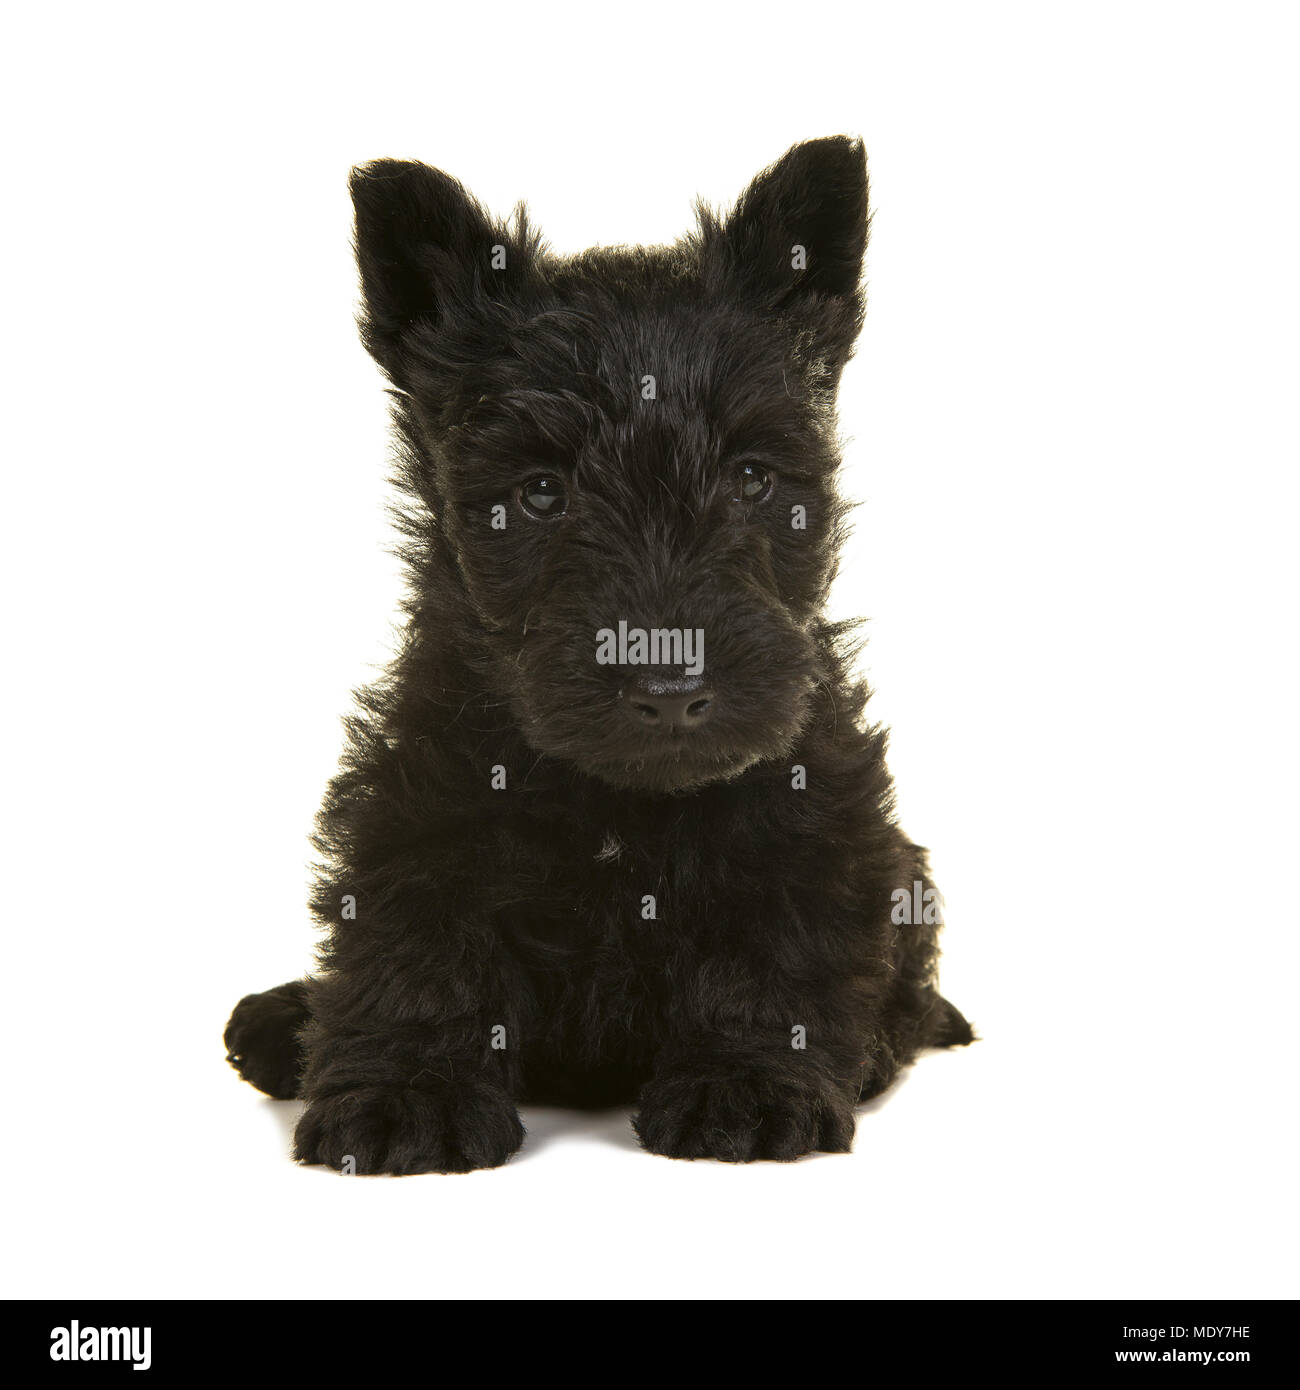 Cute black scottish terrier puppy sitting isolated on a white background Stock Photo